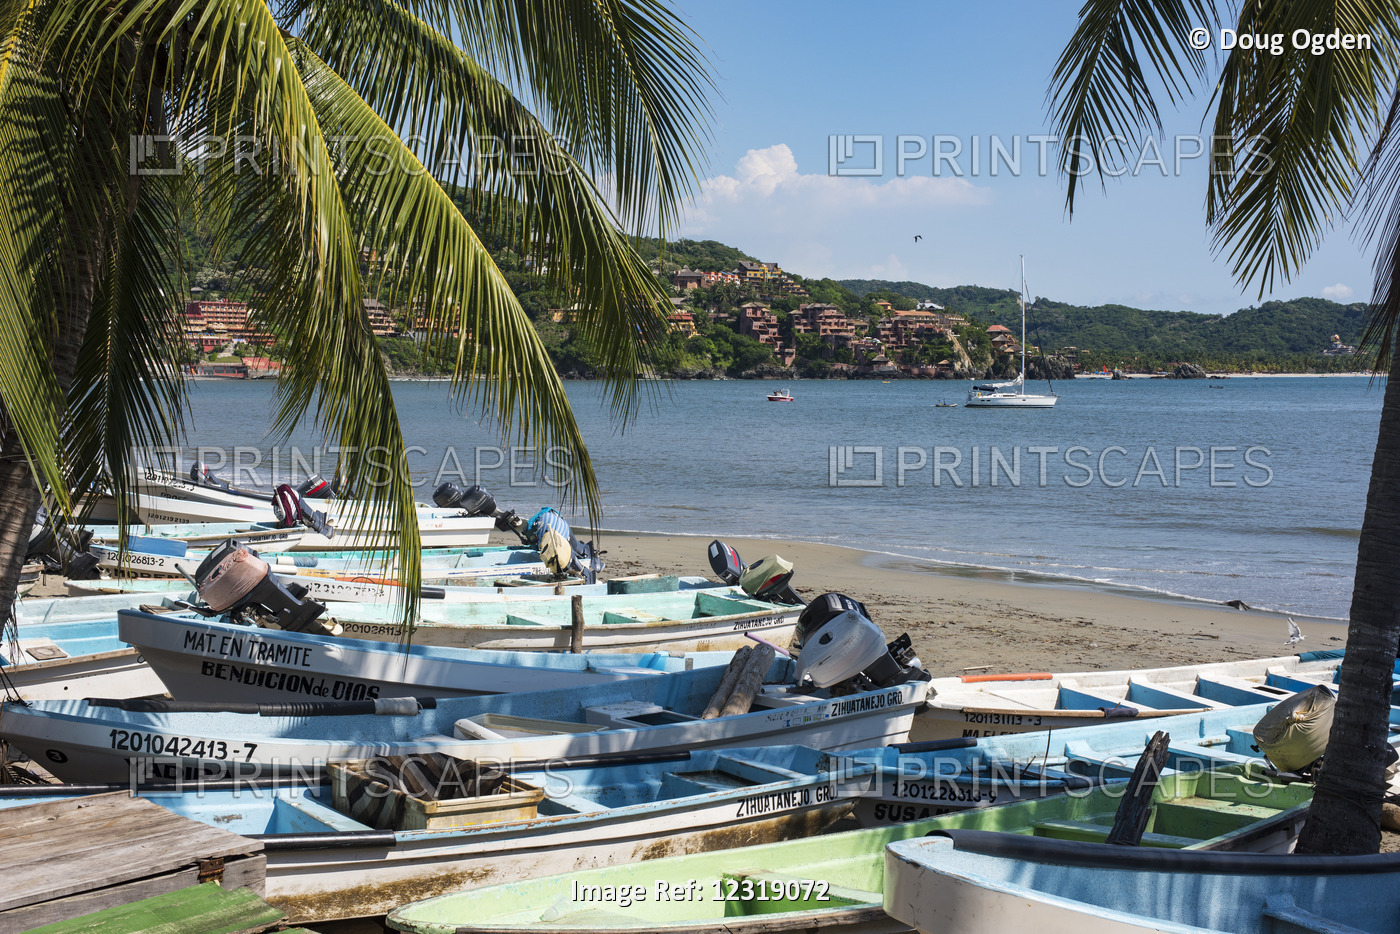 Fishing Boats, Also Known As Pangas, On Zihuatanjo Beach; Zihuatanjo, Mexico